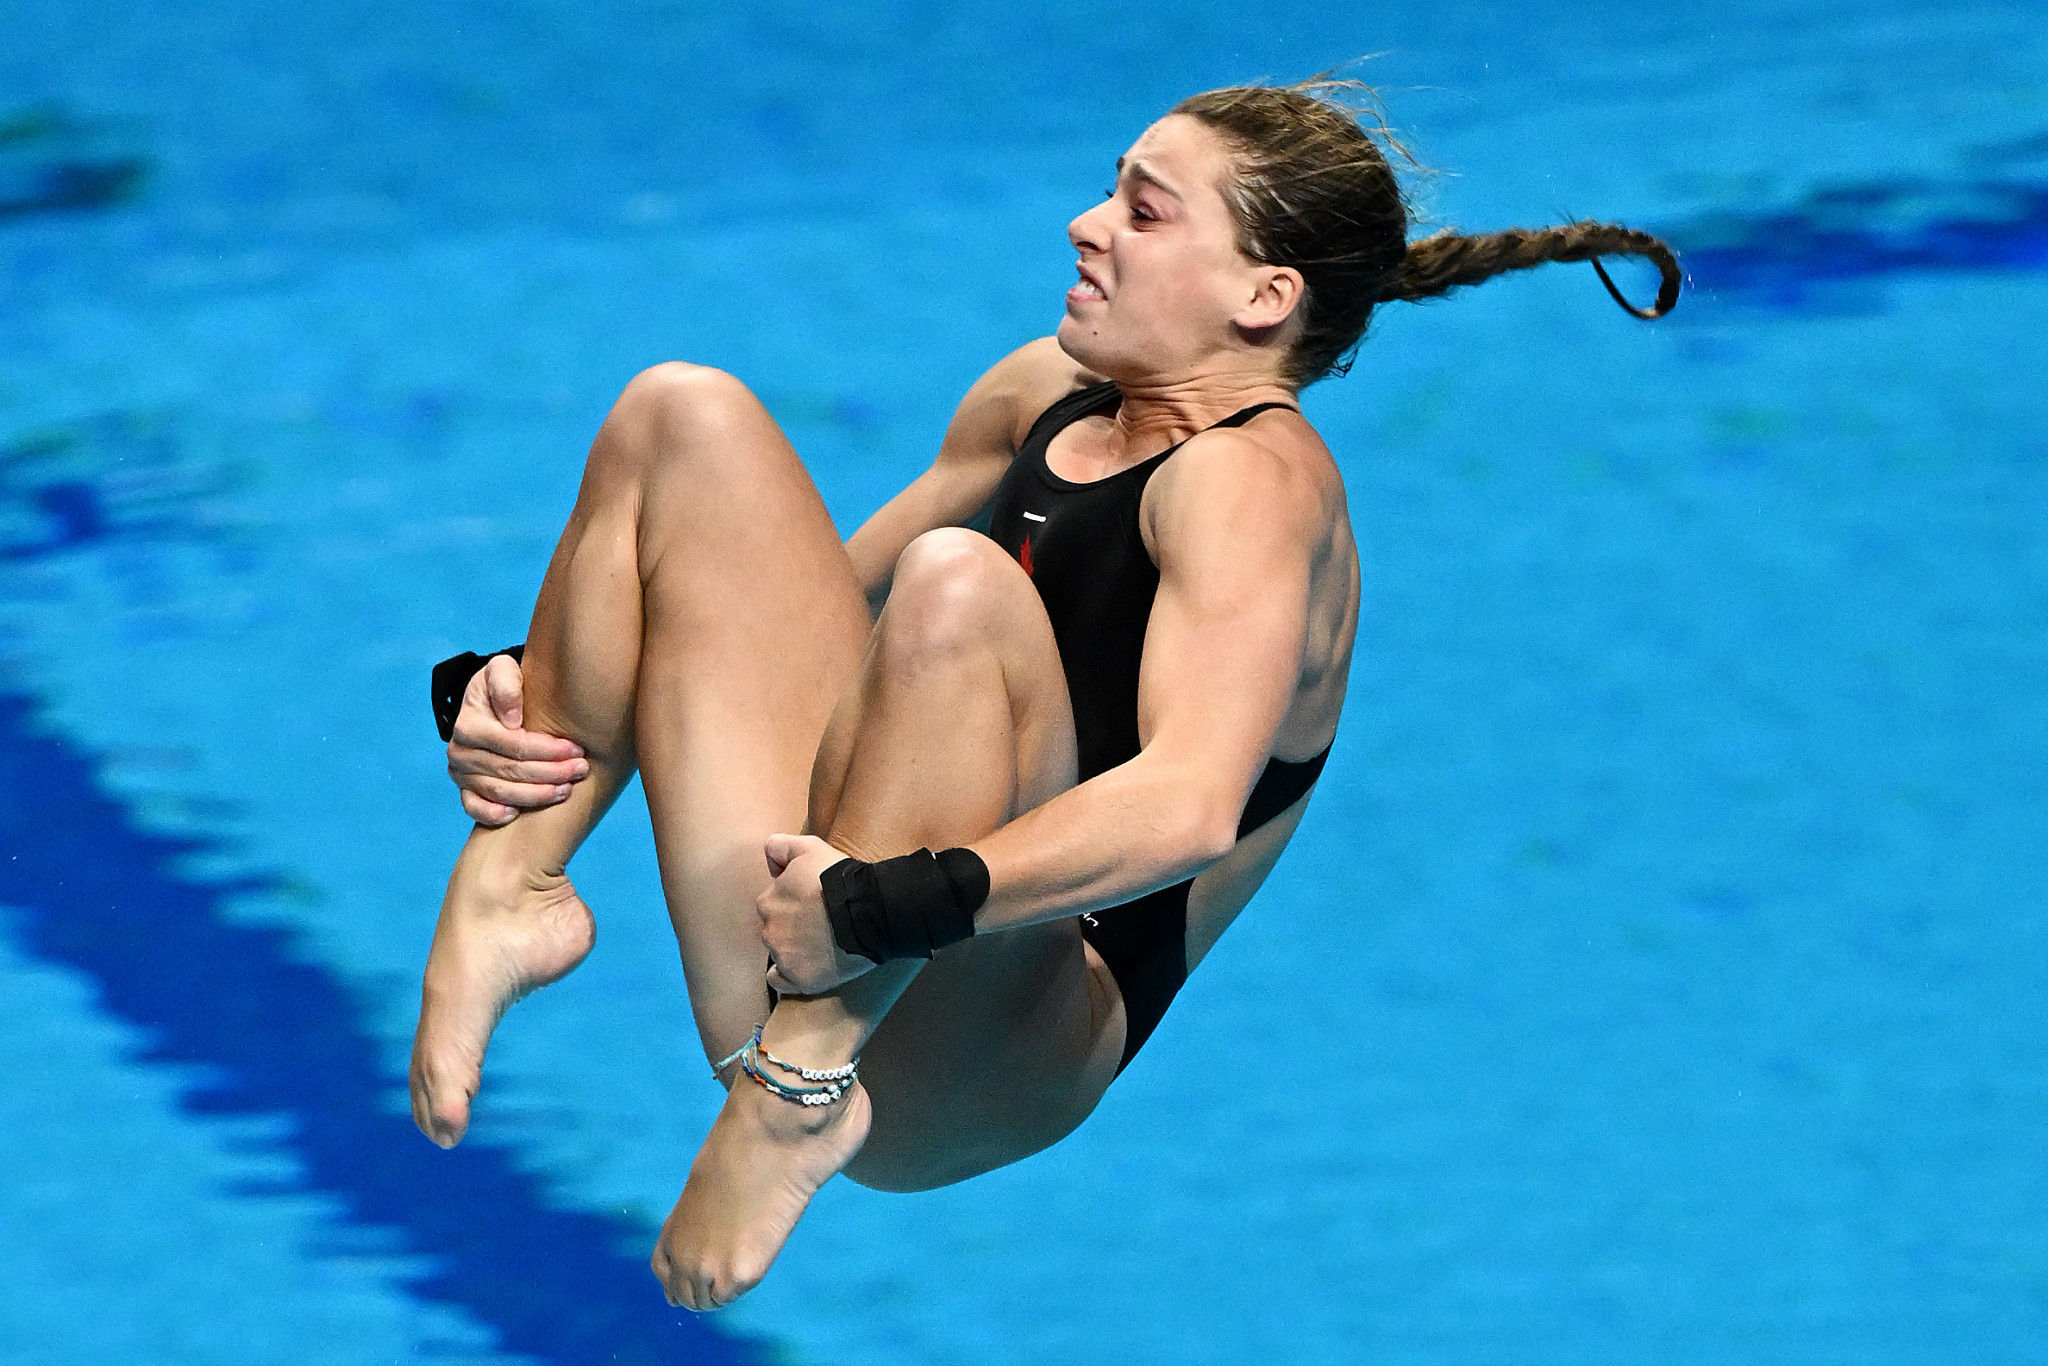 Canada's Mia Vallée led for the first three rounds of the women's 1m springboard final, but had to settle for third place ©Getty Images